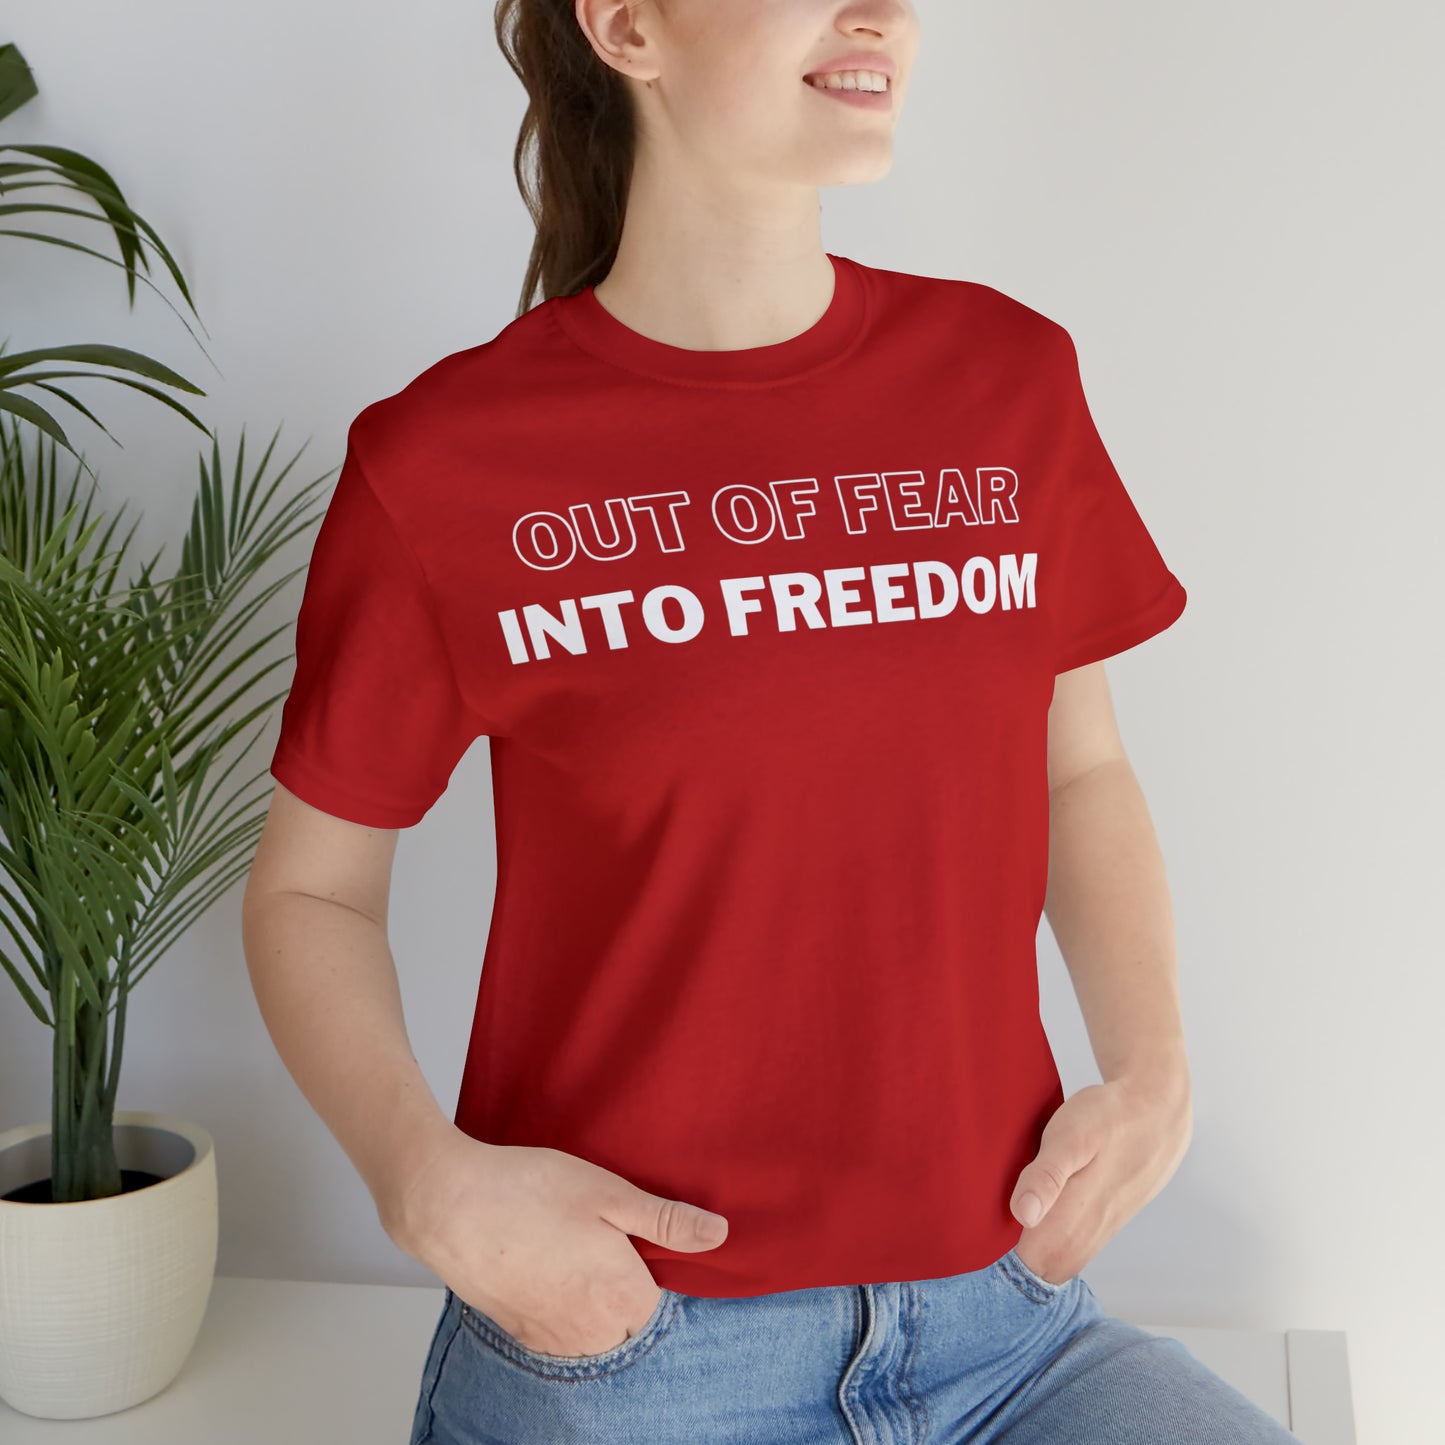 Out of Fear/Into Freedom Tee